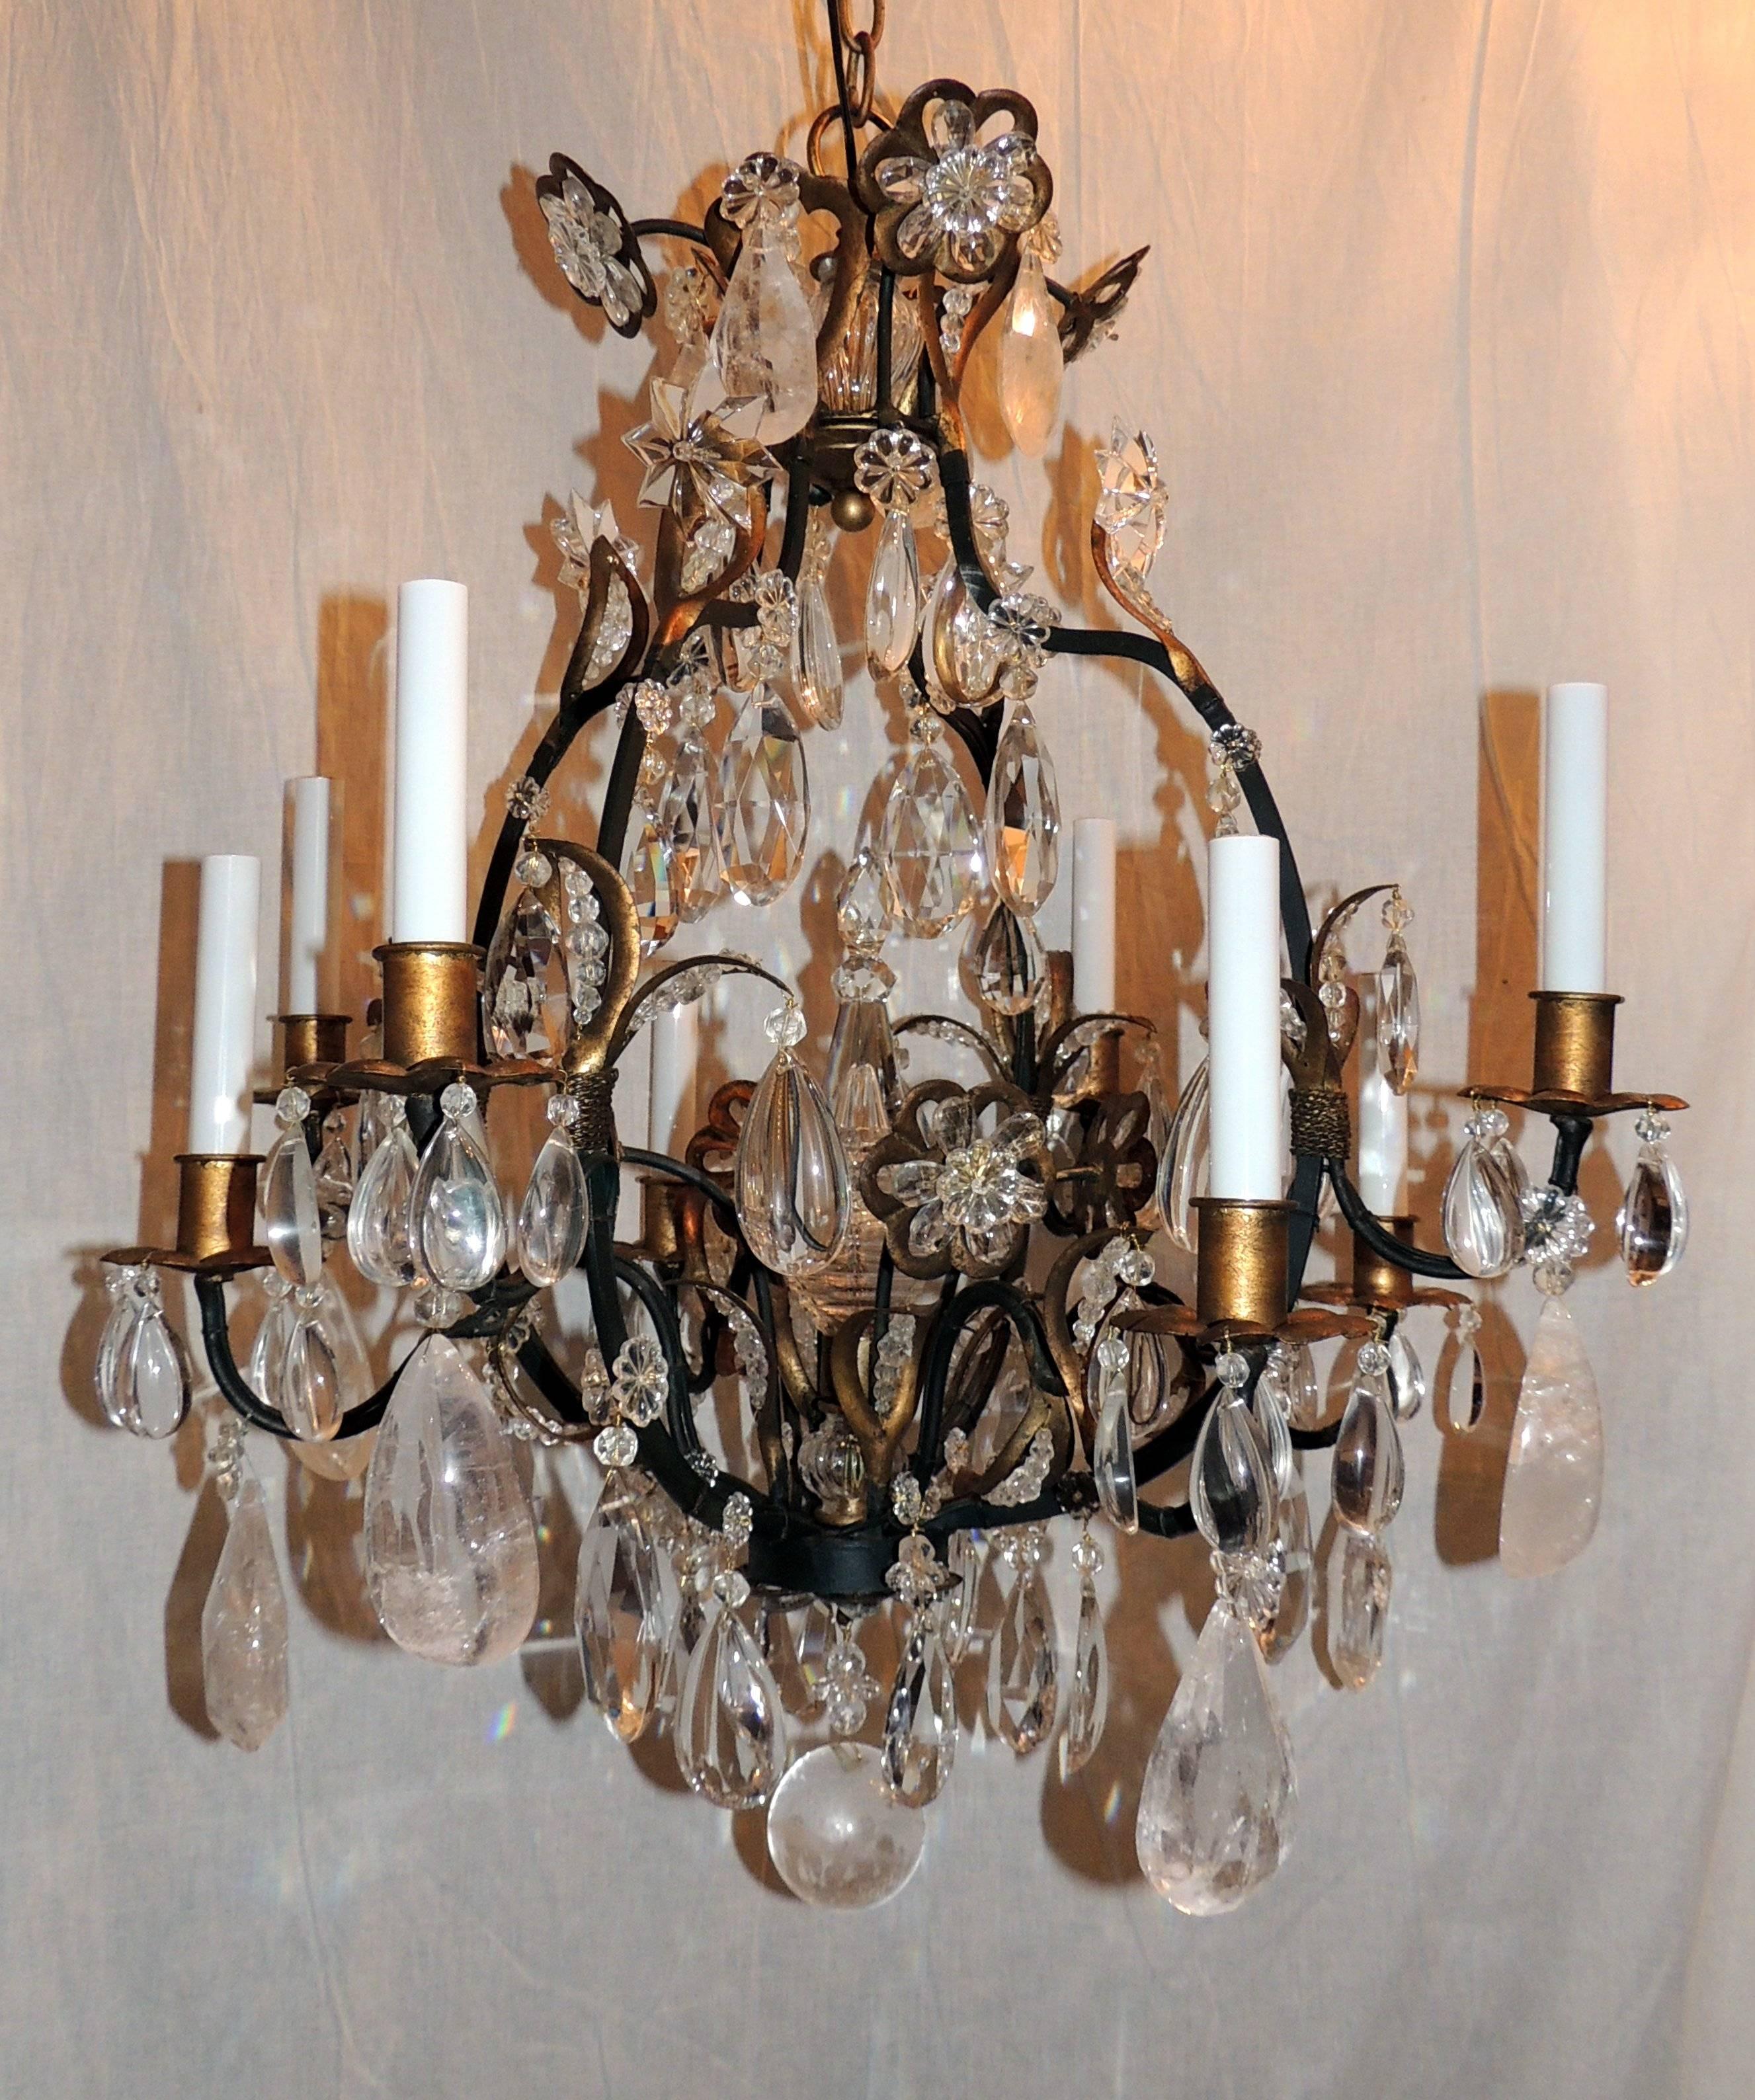 A lovely set of three French iron & rock crystal chandeliers with eight lights in the manner of Bagues.
The details: beaded crystals are the center of each of the leaves, rock crystal surround the top crystal flowers and throughout the chandelier